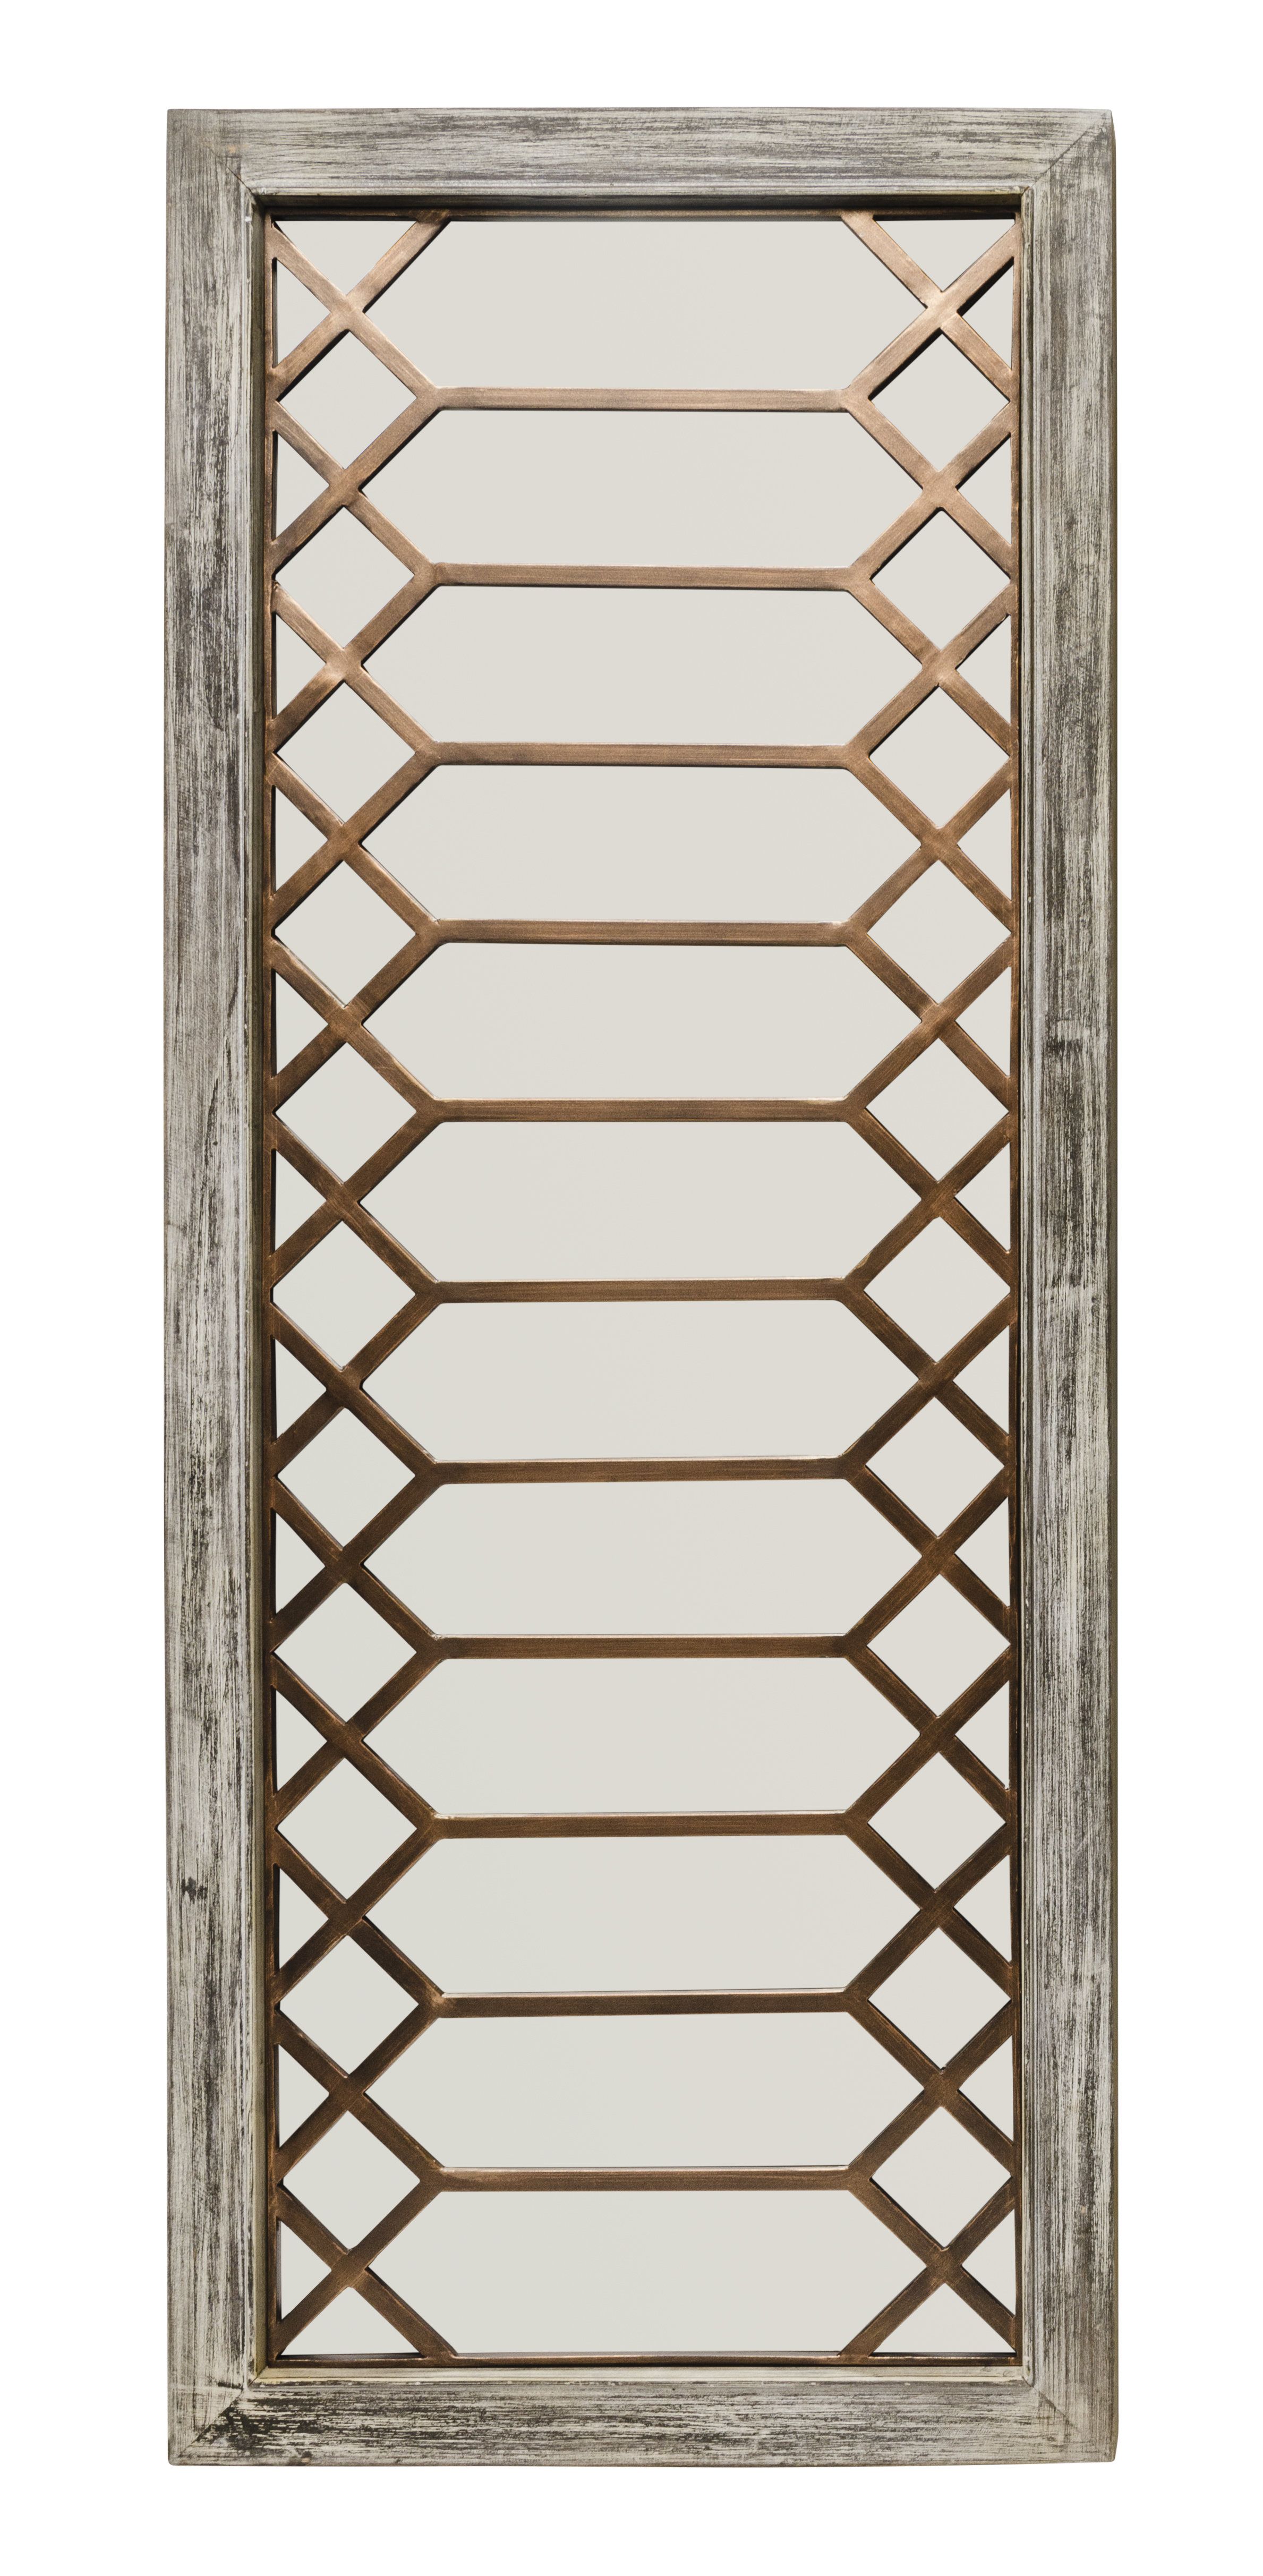 Lark Manor Polito Wall Mirror In Dandre Wall Mirrors (View 9 of 20)